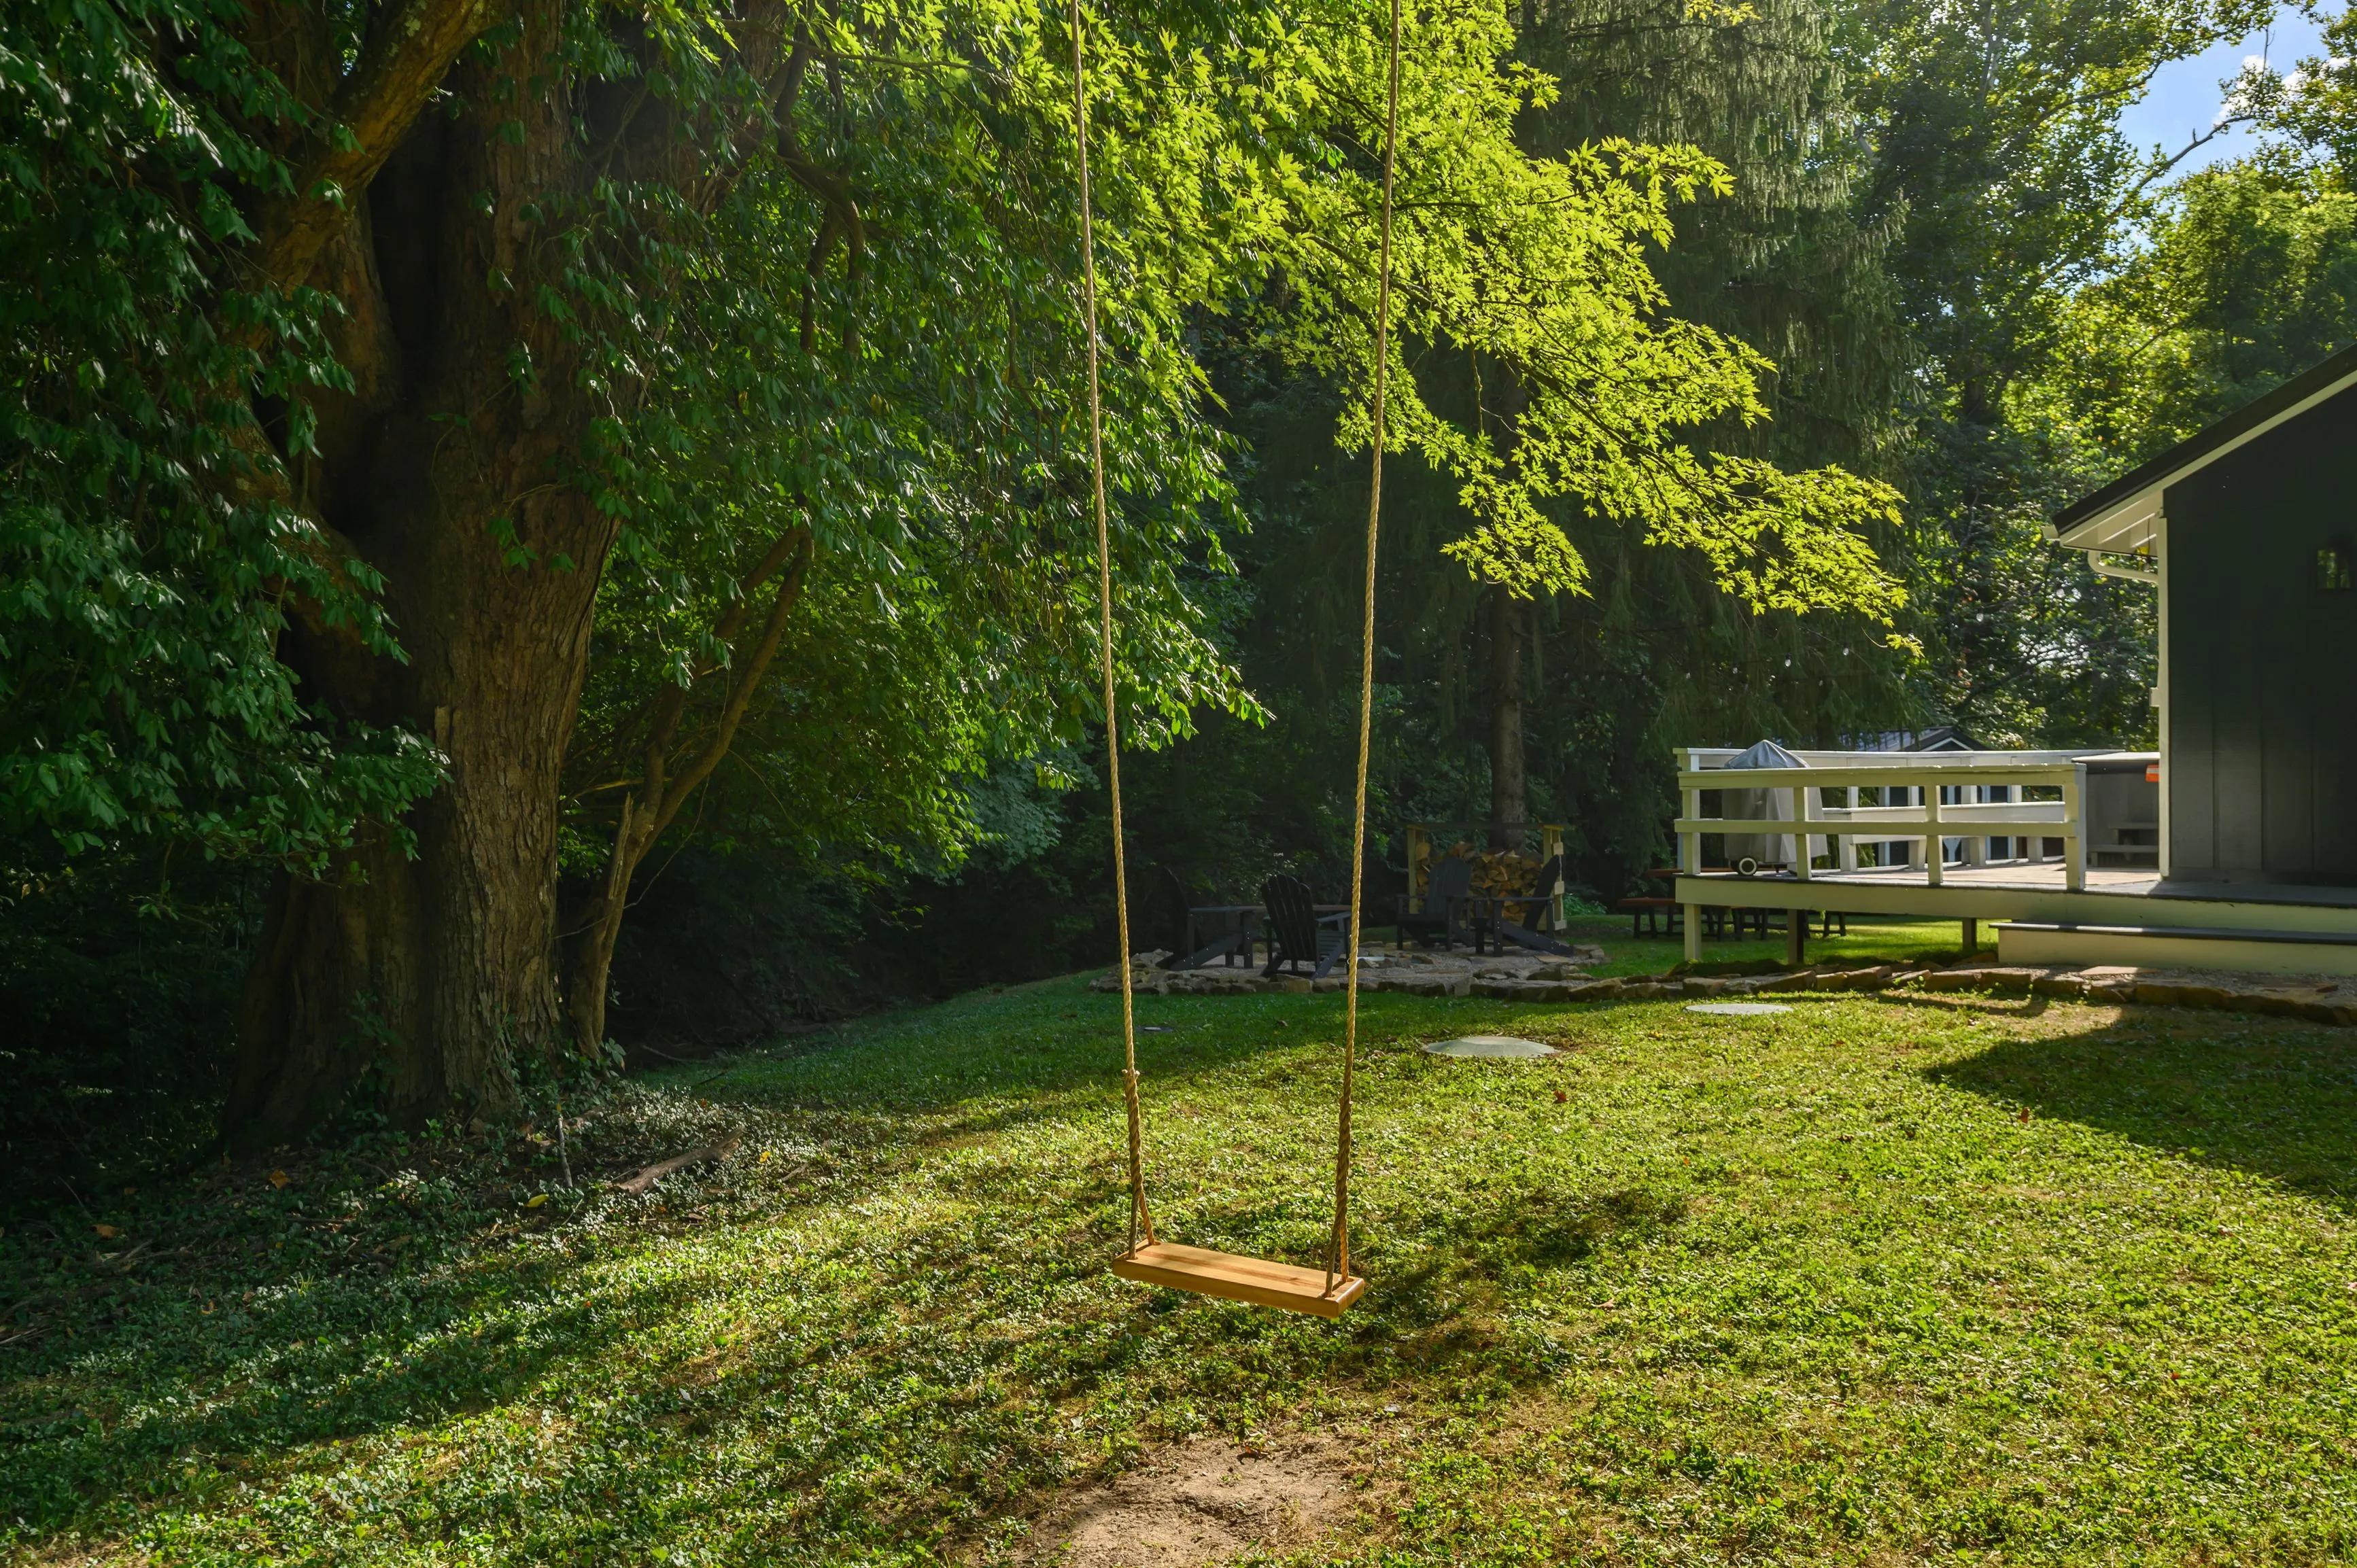 A wooden swing hanging from a tree in a lush green backyard with a playhouse in the background and sunlight filtering through the leaves.